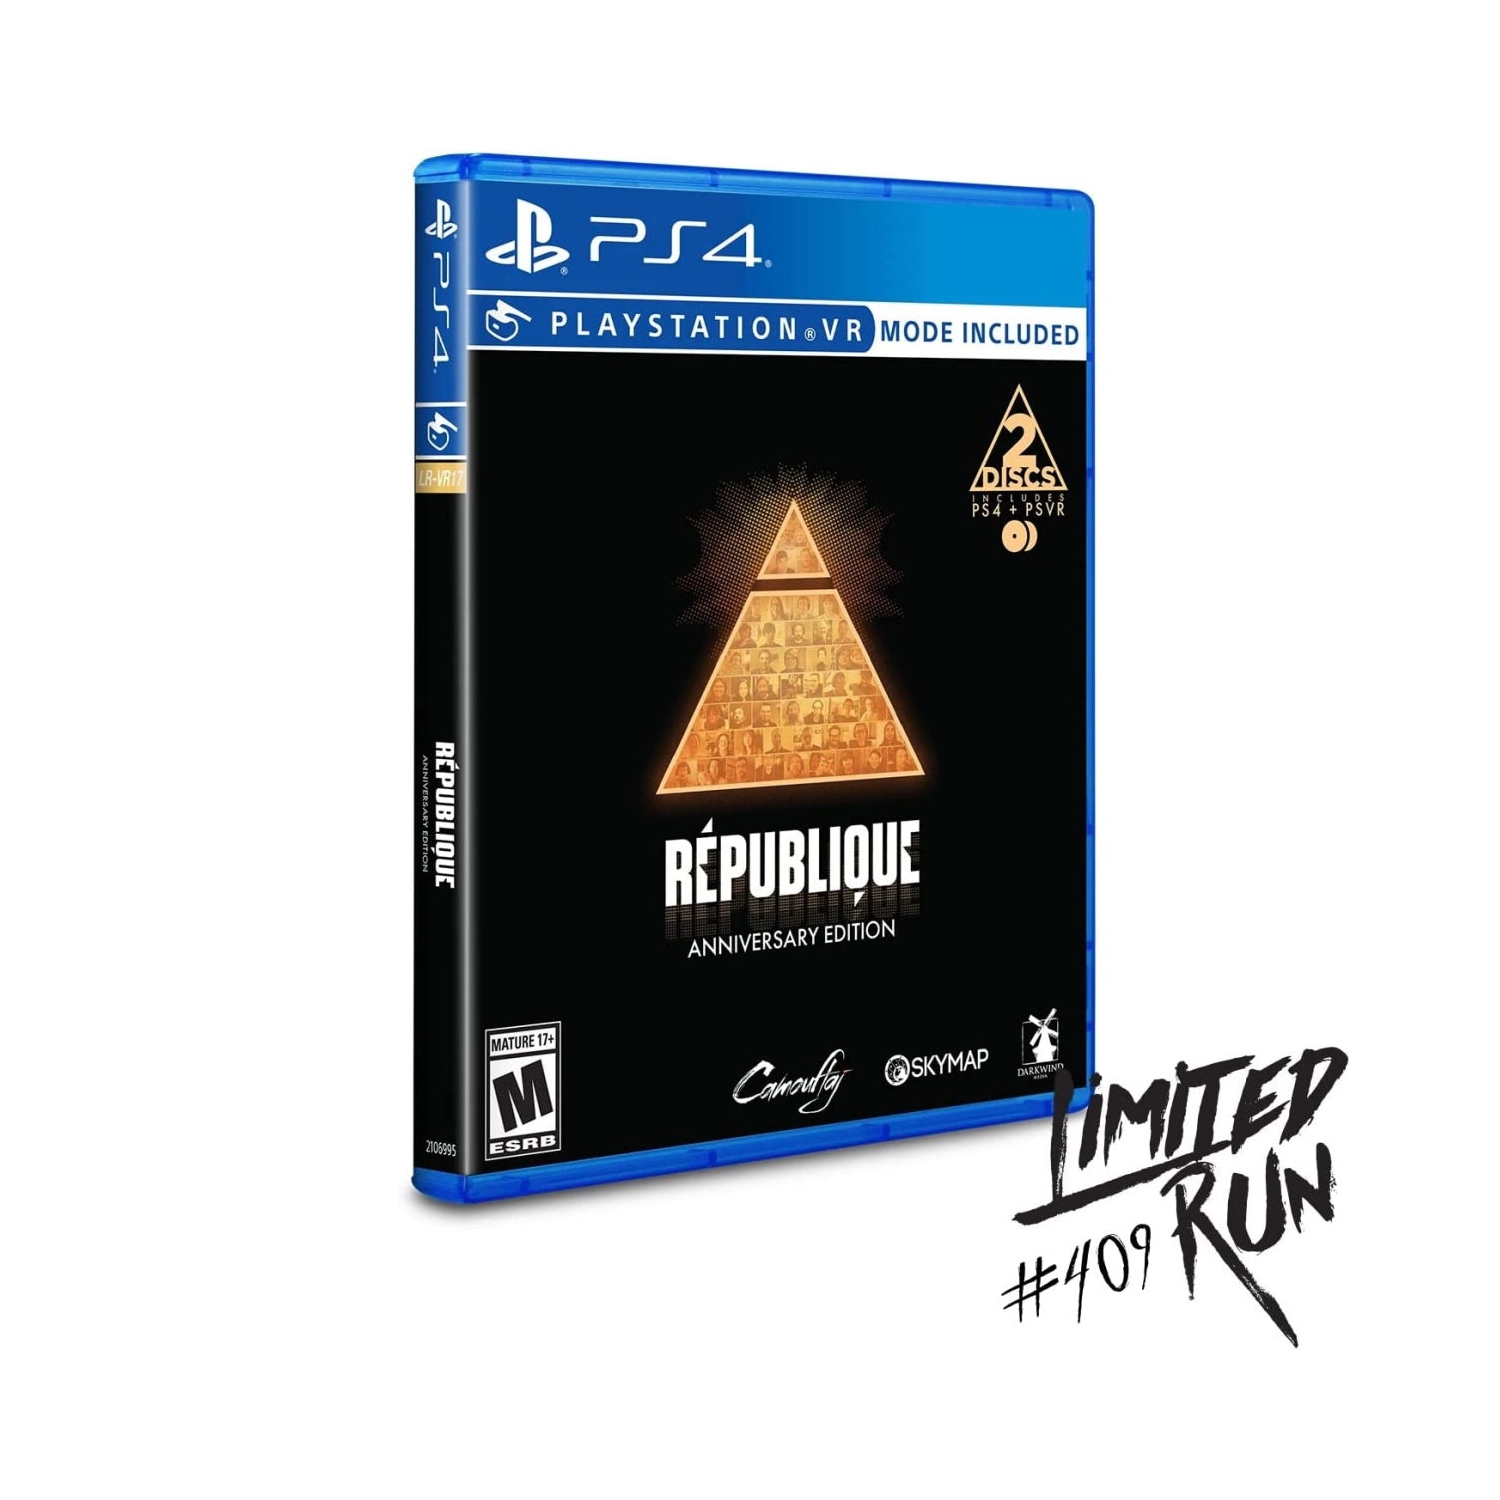 Republique - Anniversary Edition - Limited Run #409 [PlayStation 4 - VR Mode Included]